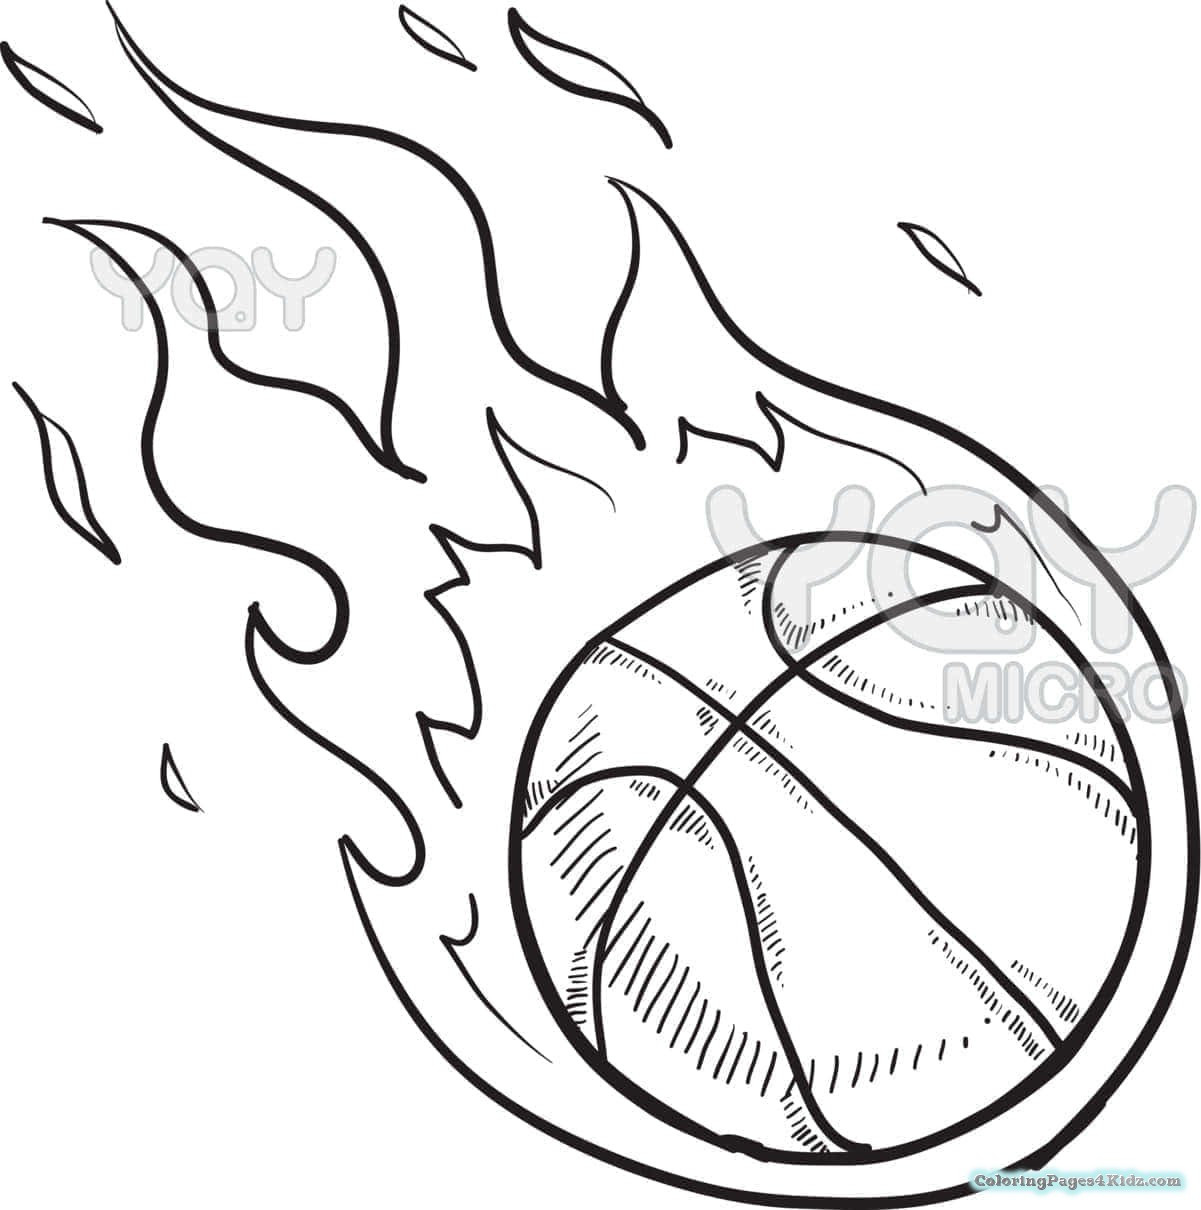 Basketball Coloring Book
 Stephen Curry Basketball Shoes Coloring Pages